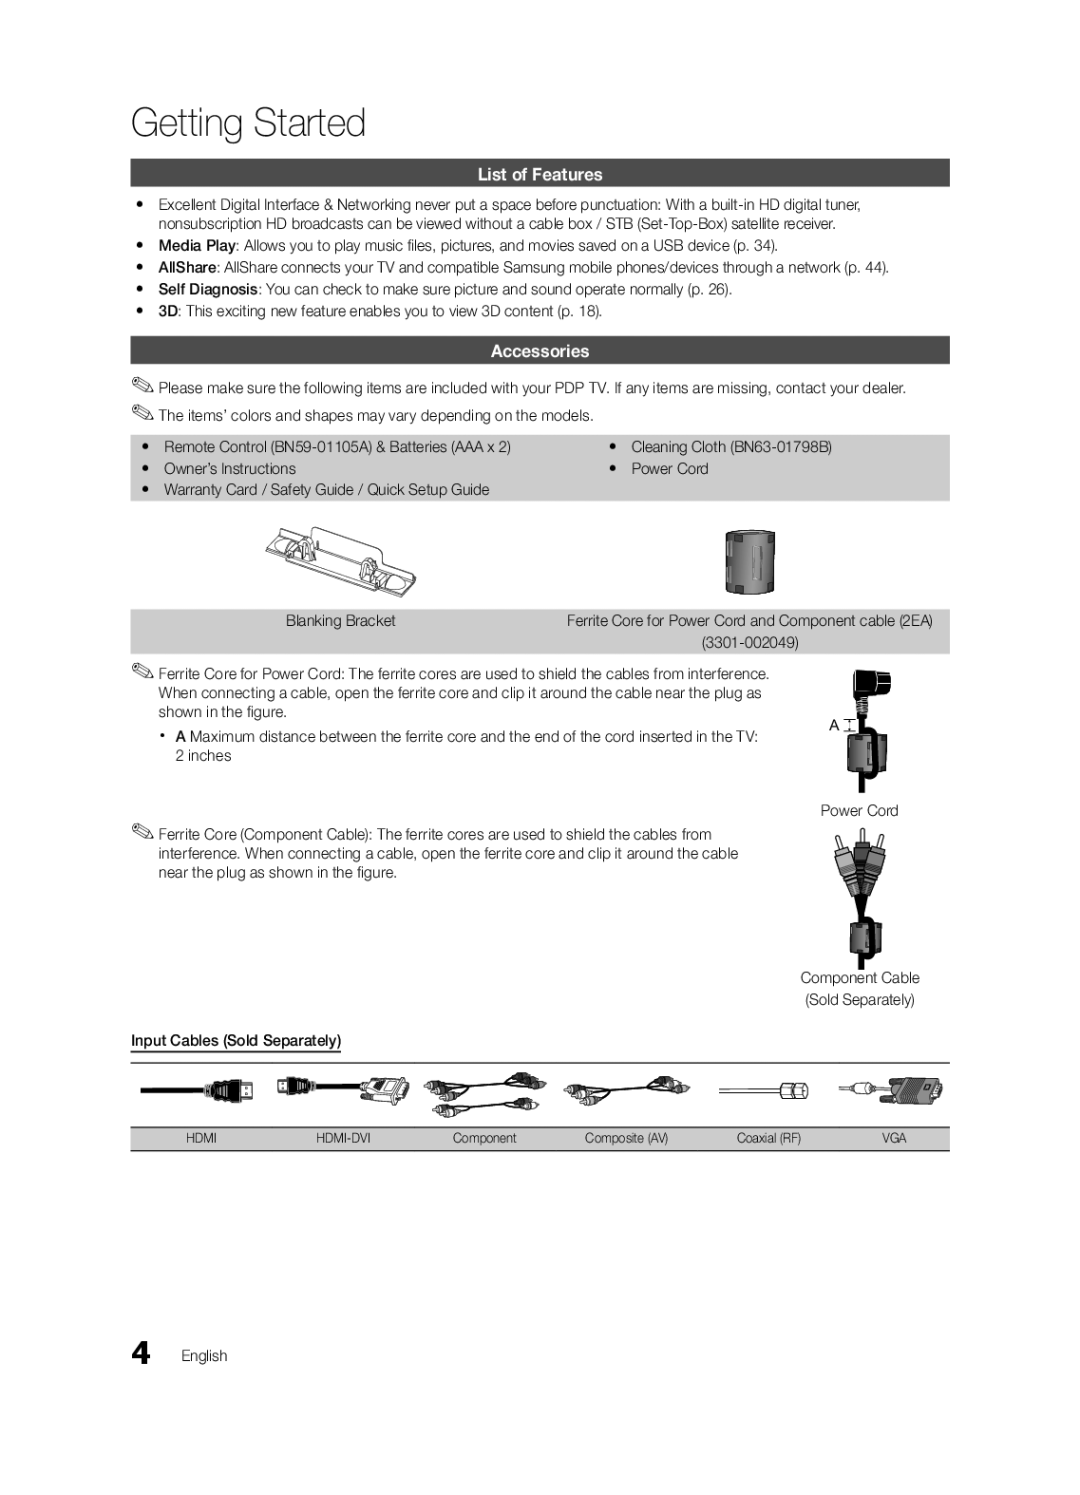 Samsung PC680-ZA, BN68-03116A-01, Series P6+ 680 user manual List of Features, Accessories, 3301-002049 